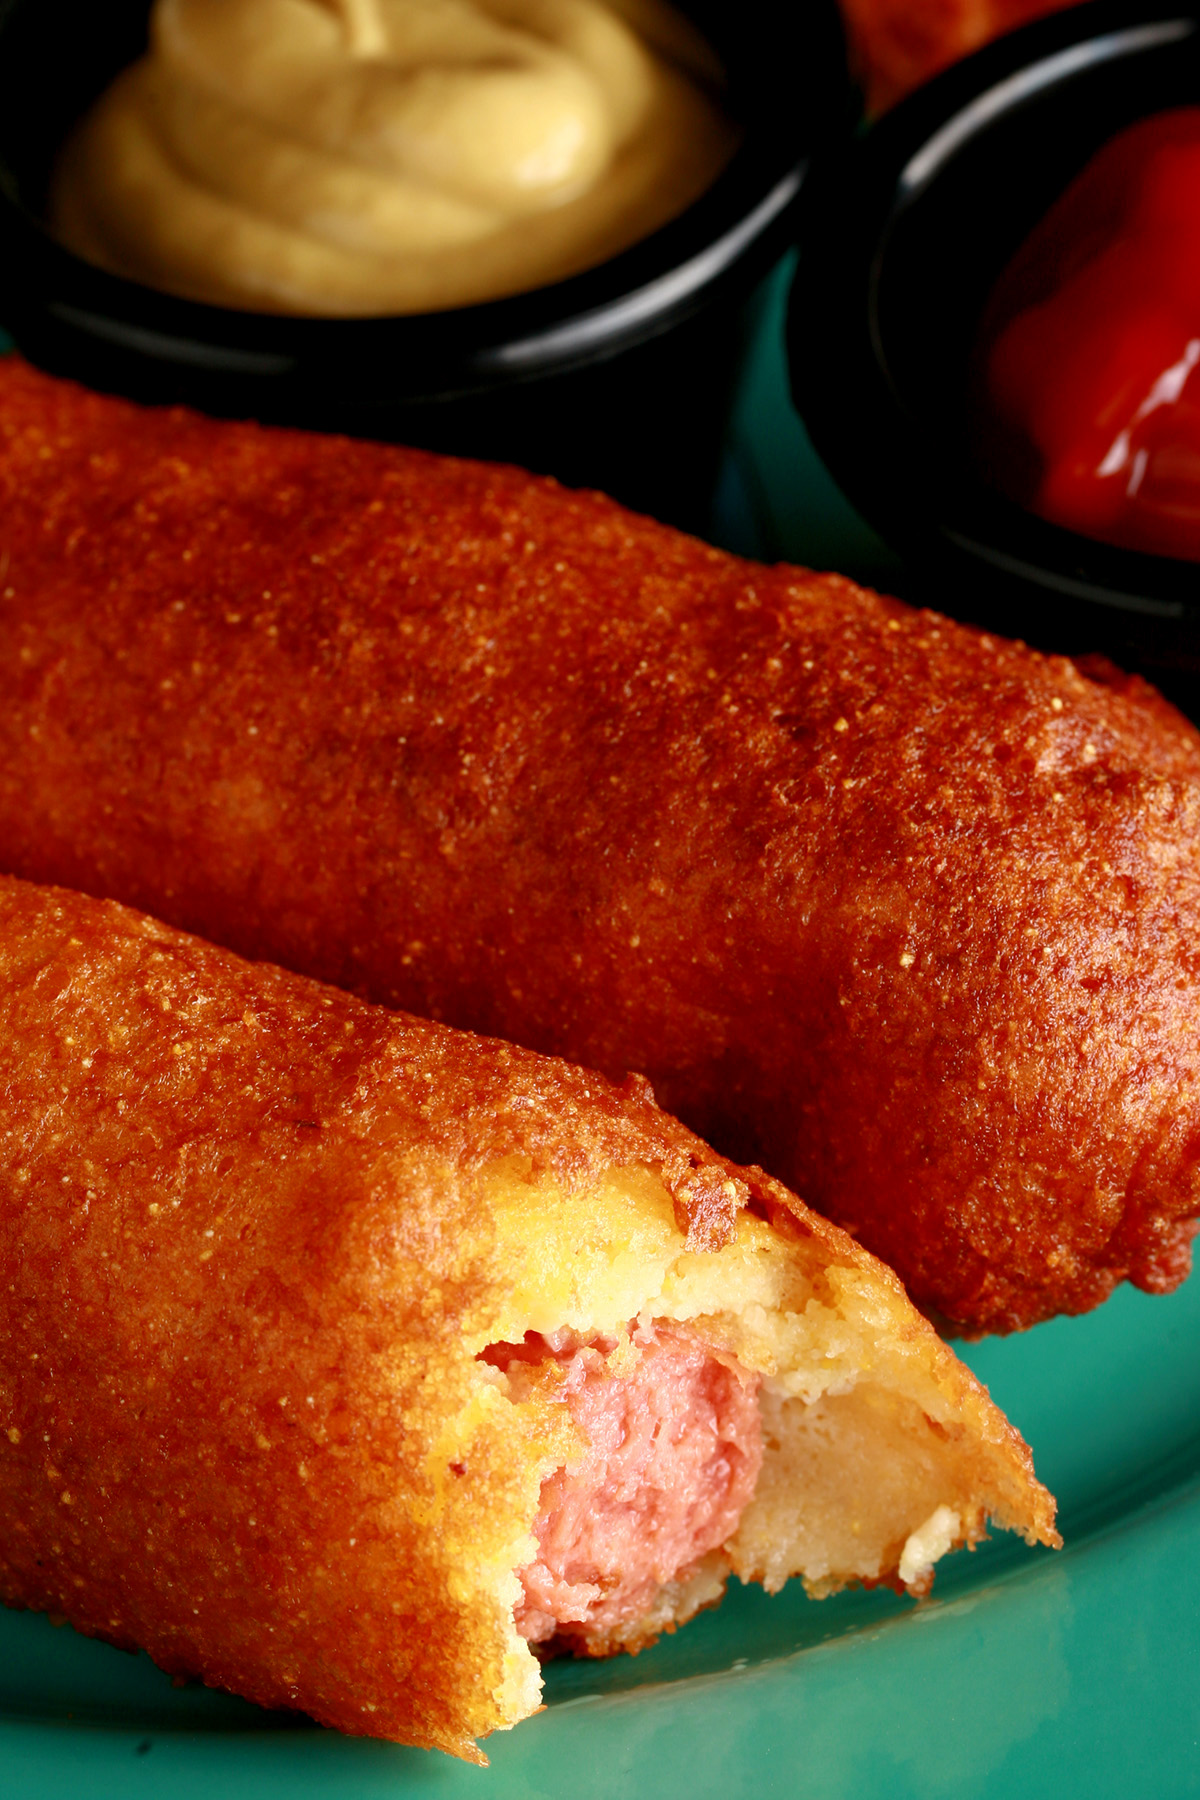 3 gluten-free corndogs on a green plate, with little bowls of ketchup and mustard.